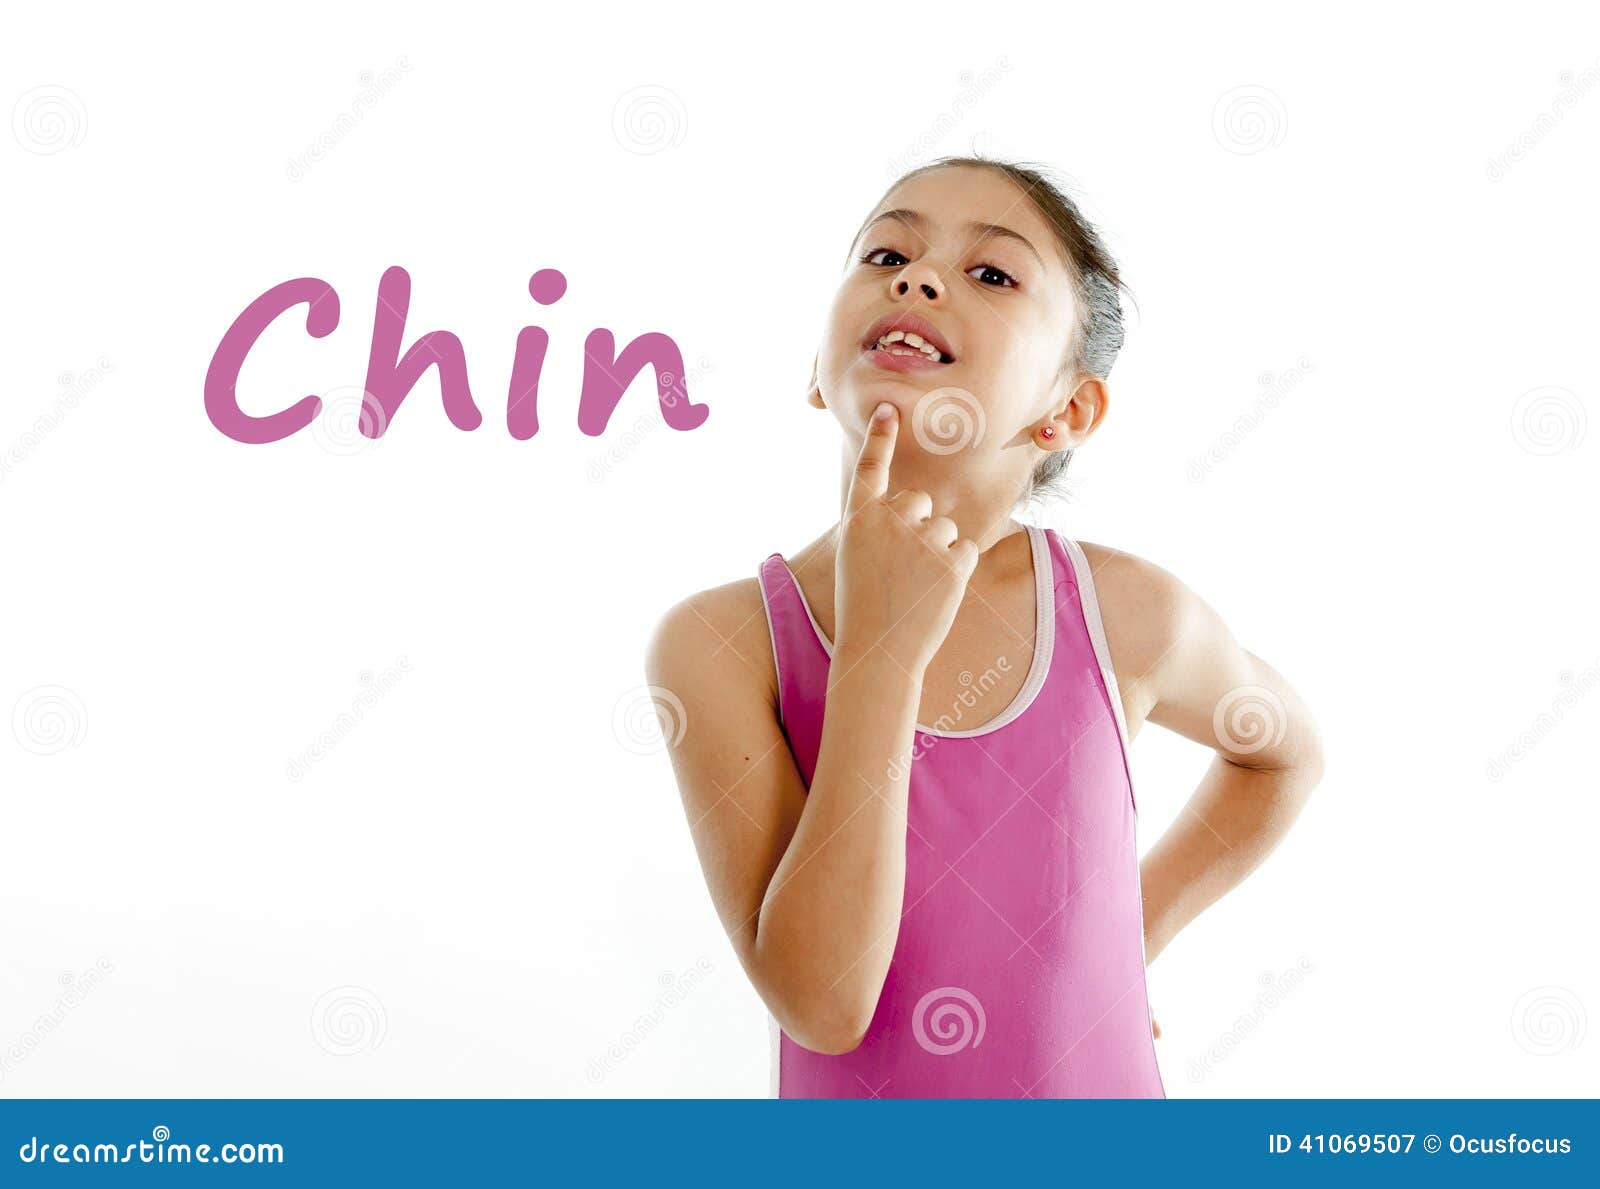 learning body parts school card of girl pointing at her chin on white background